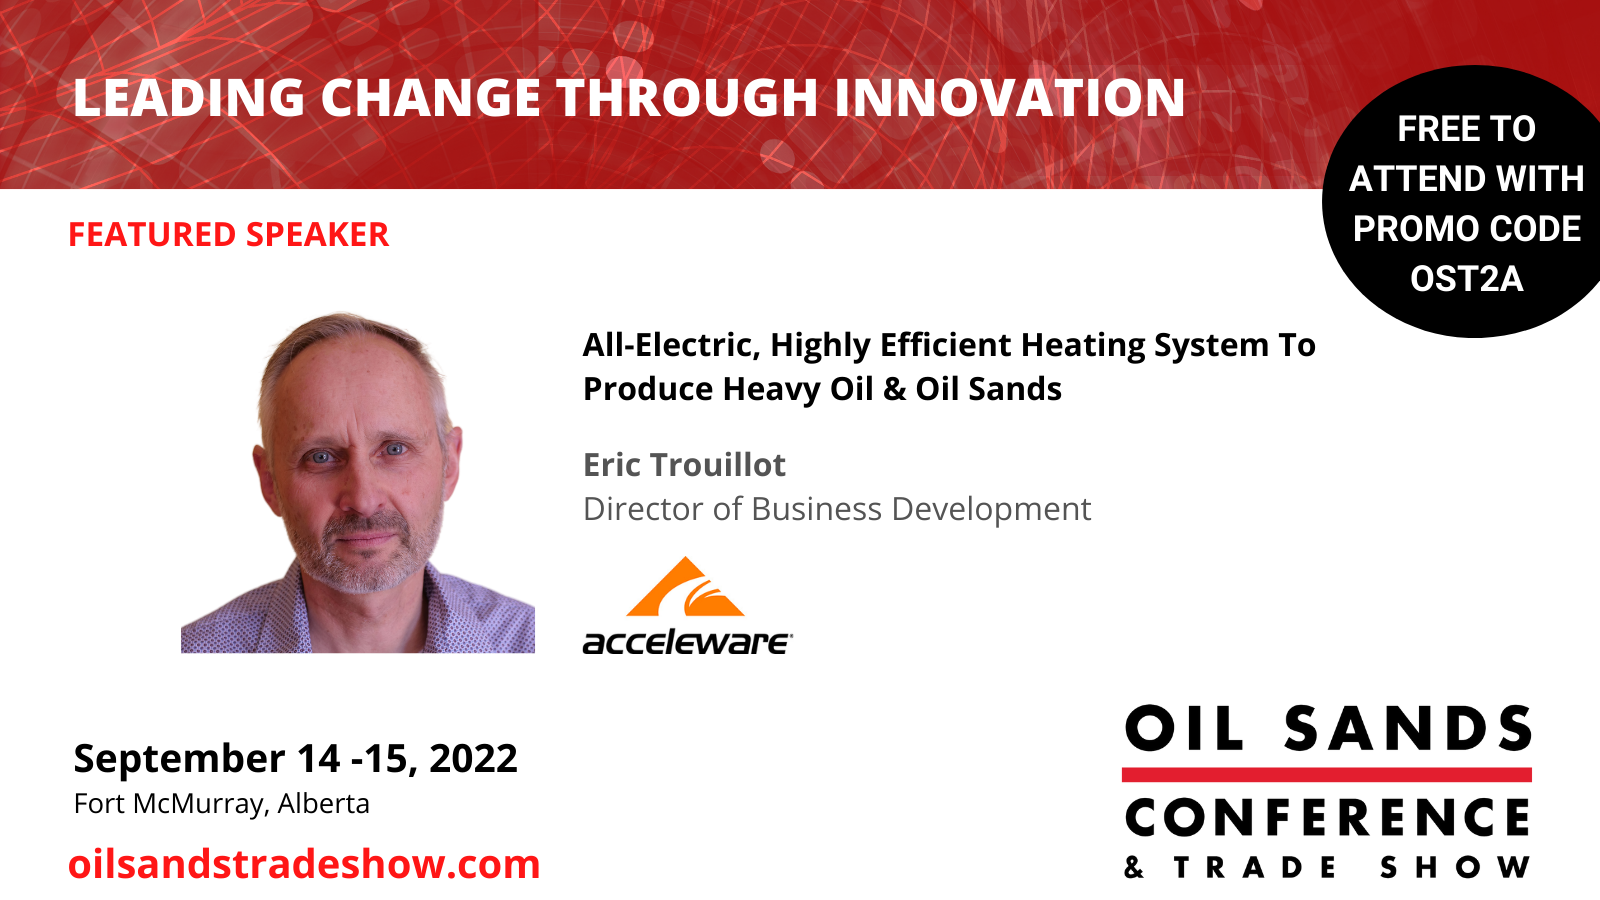 Leading Change Through Innovation - TECHtalk at the Oil Sands Conference and Tradeshow